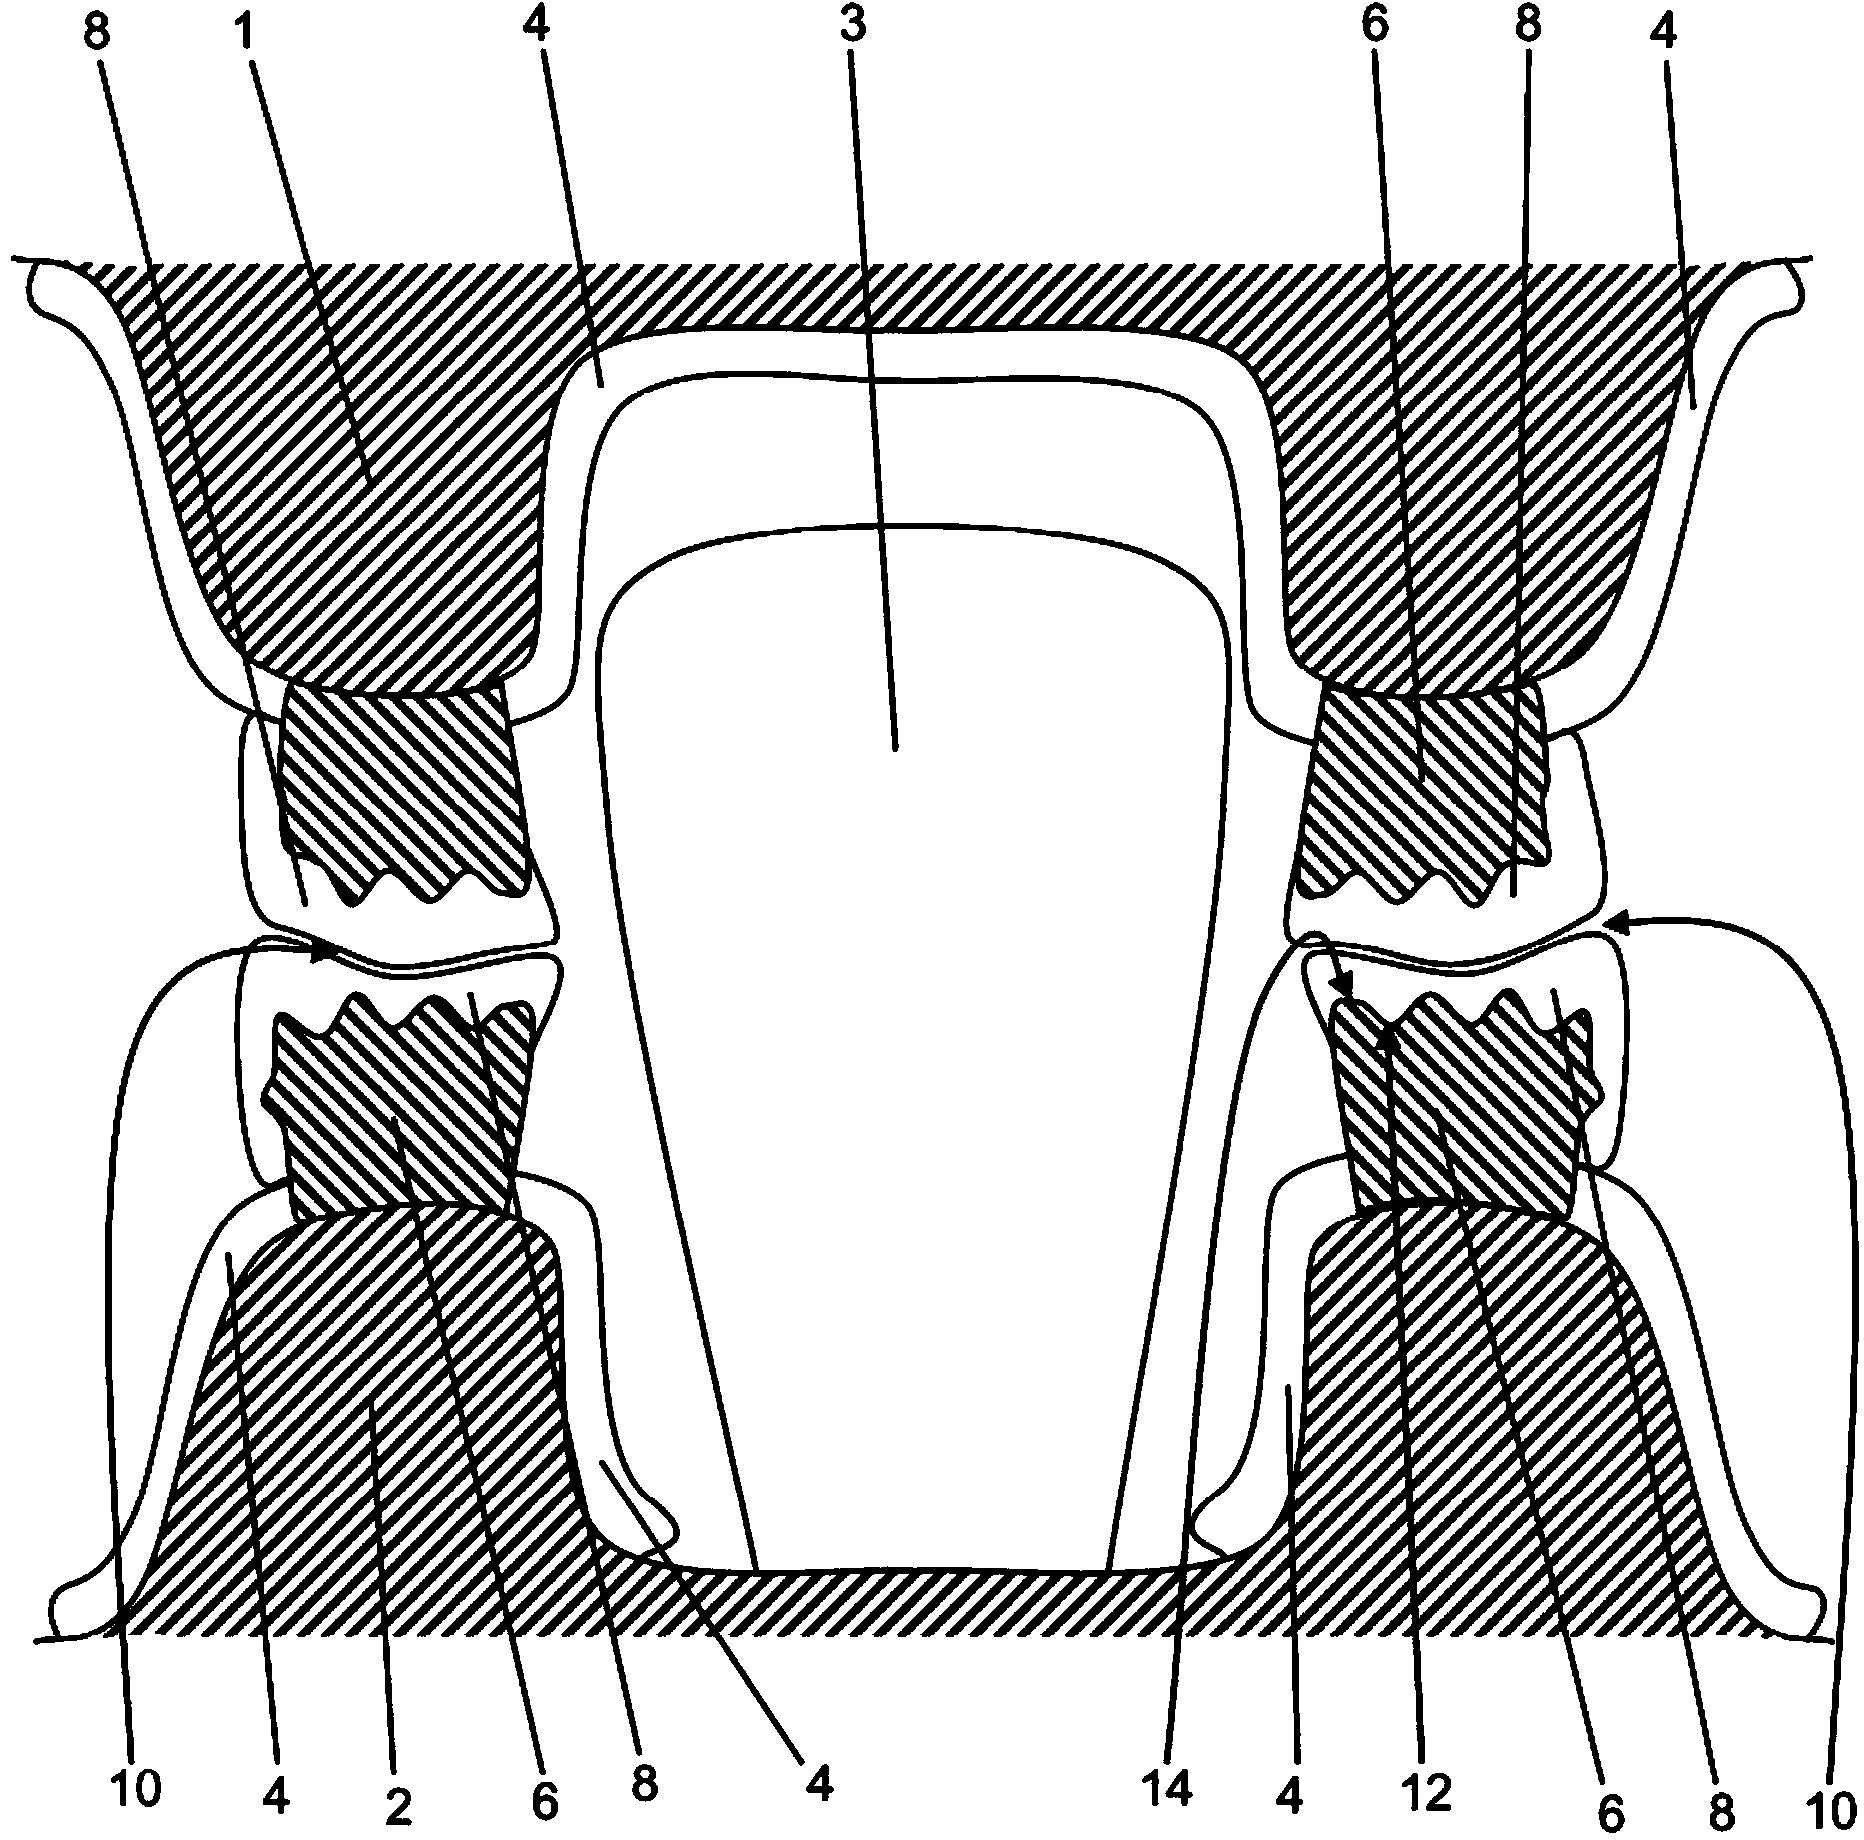 Method for producing a denture